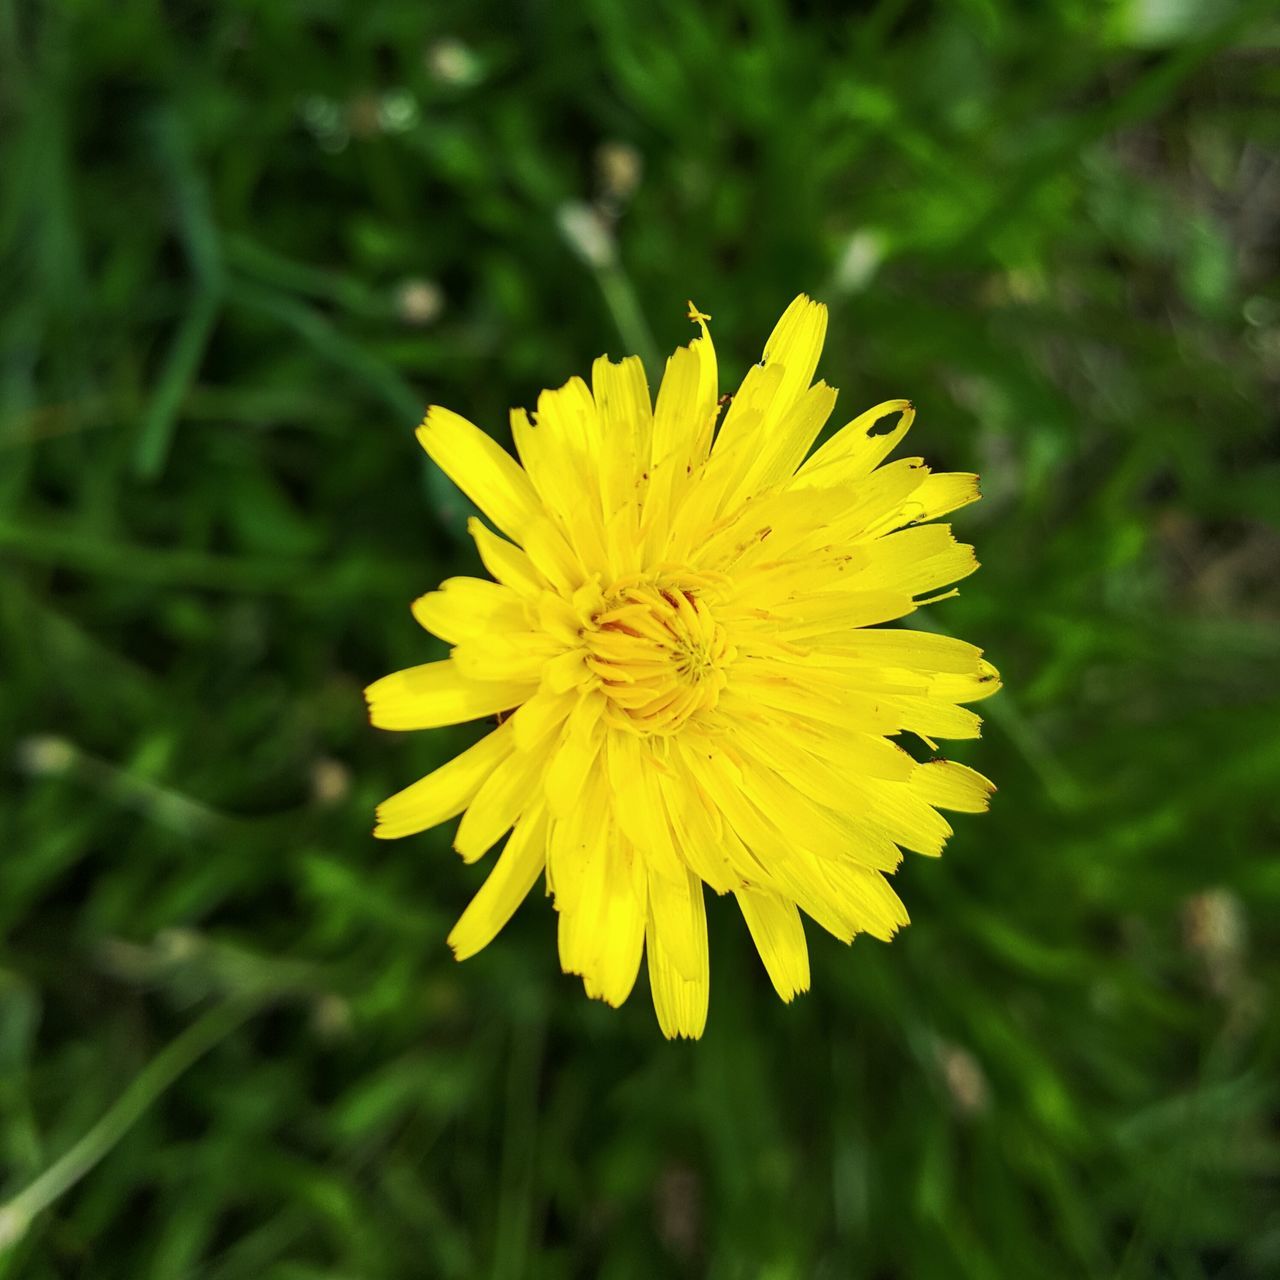 flower, petal, freshness, flower head, fragility, yellow, growth, close-up, beauty in nature, focus on foreground, blooming, nature, pollen, plant, in bloom, outdoors, day, no people, selective focus, botany, green color, blossom, softness, tranquility